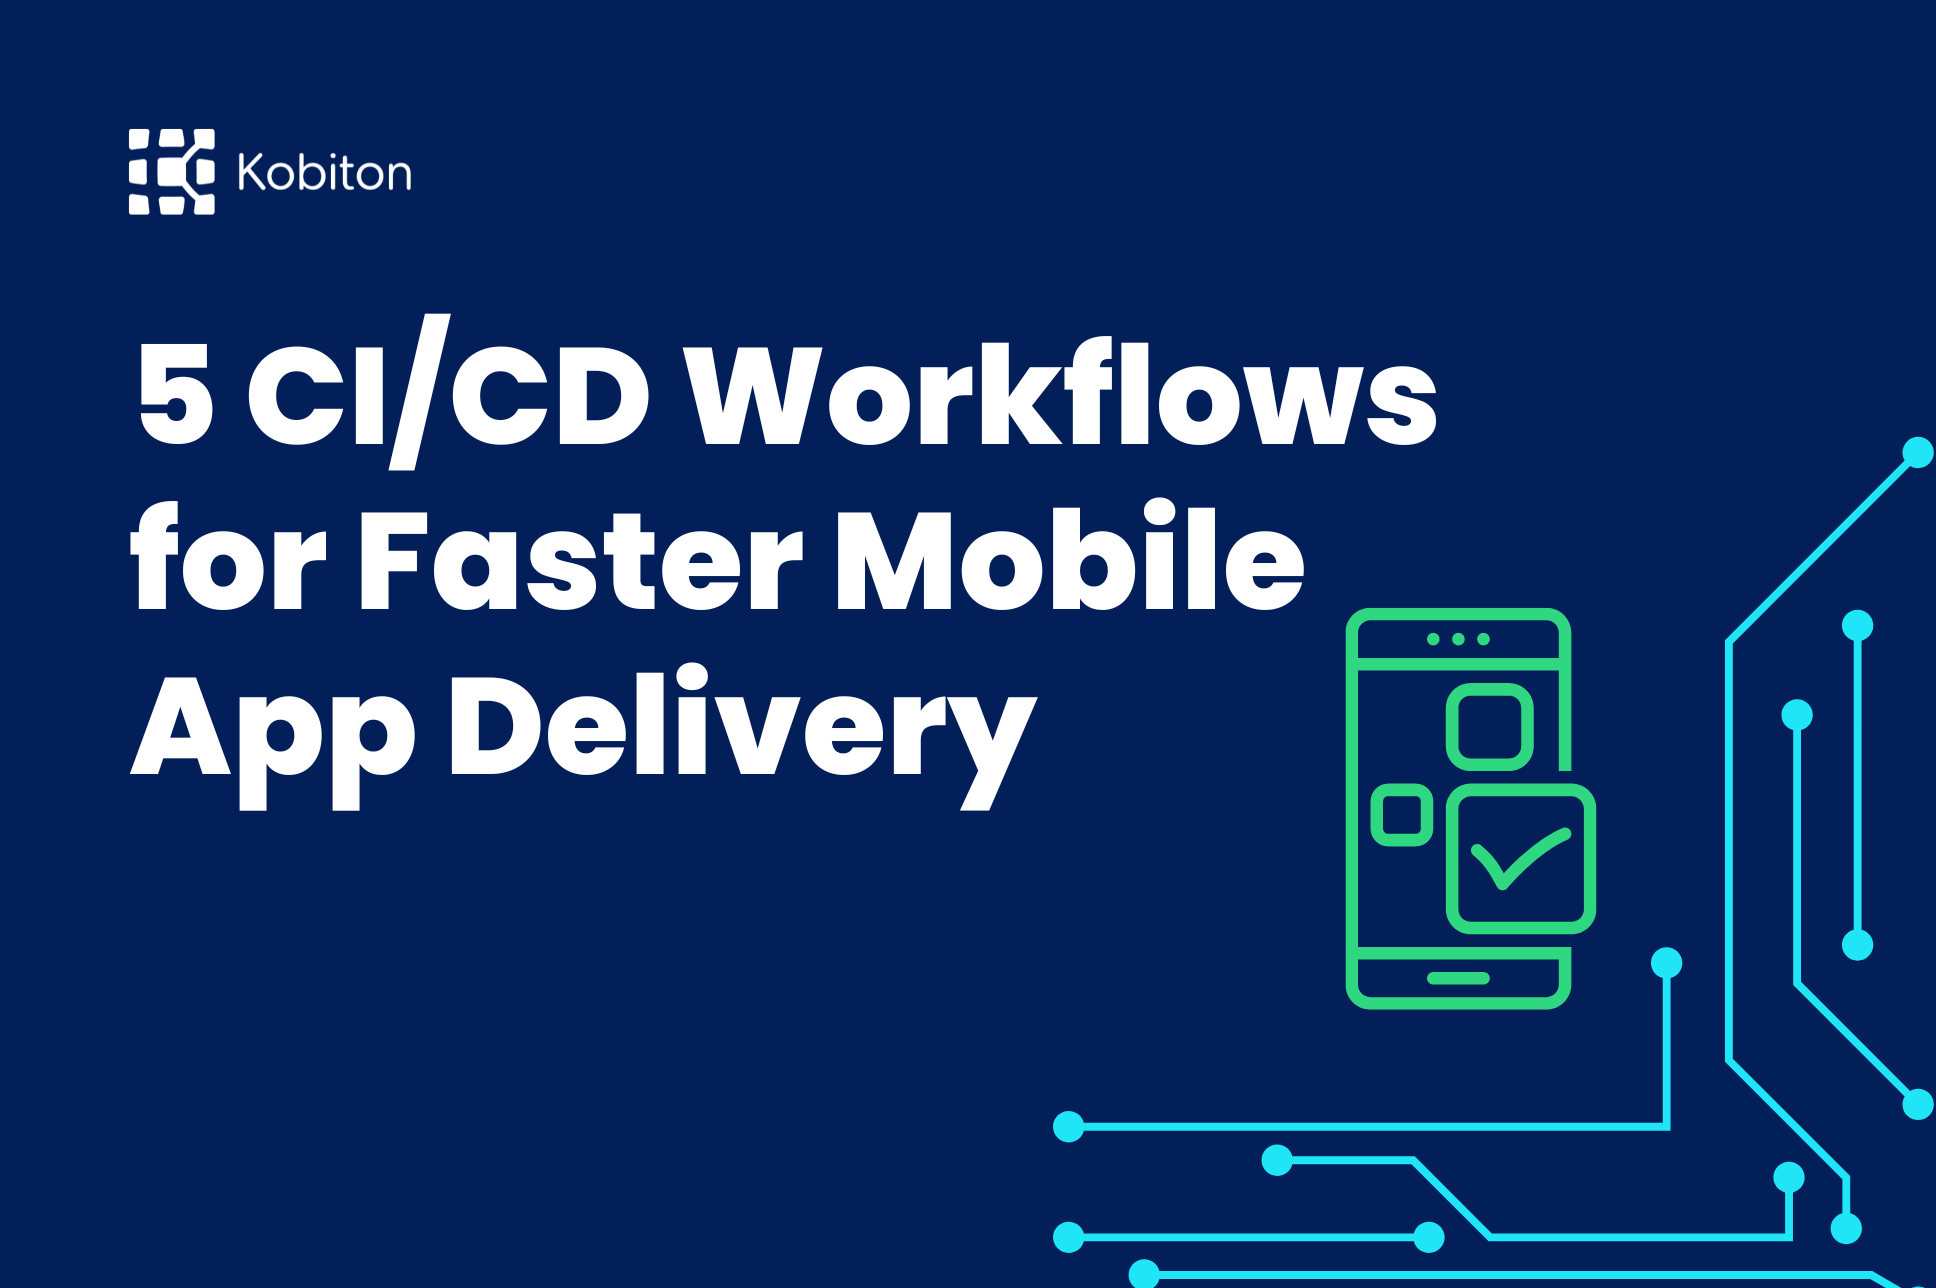 CI/CD workflow for faster mobile app delivery blog image